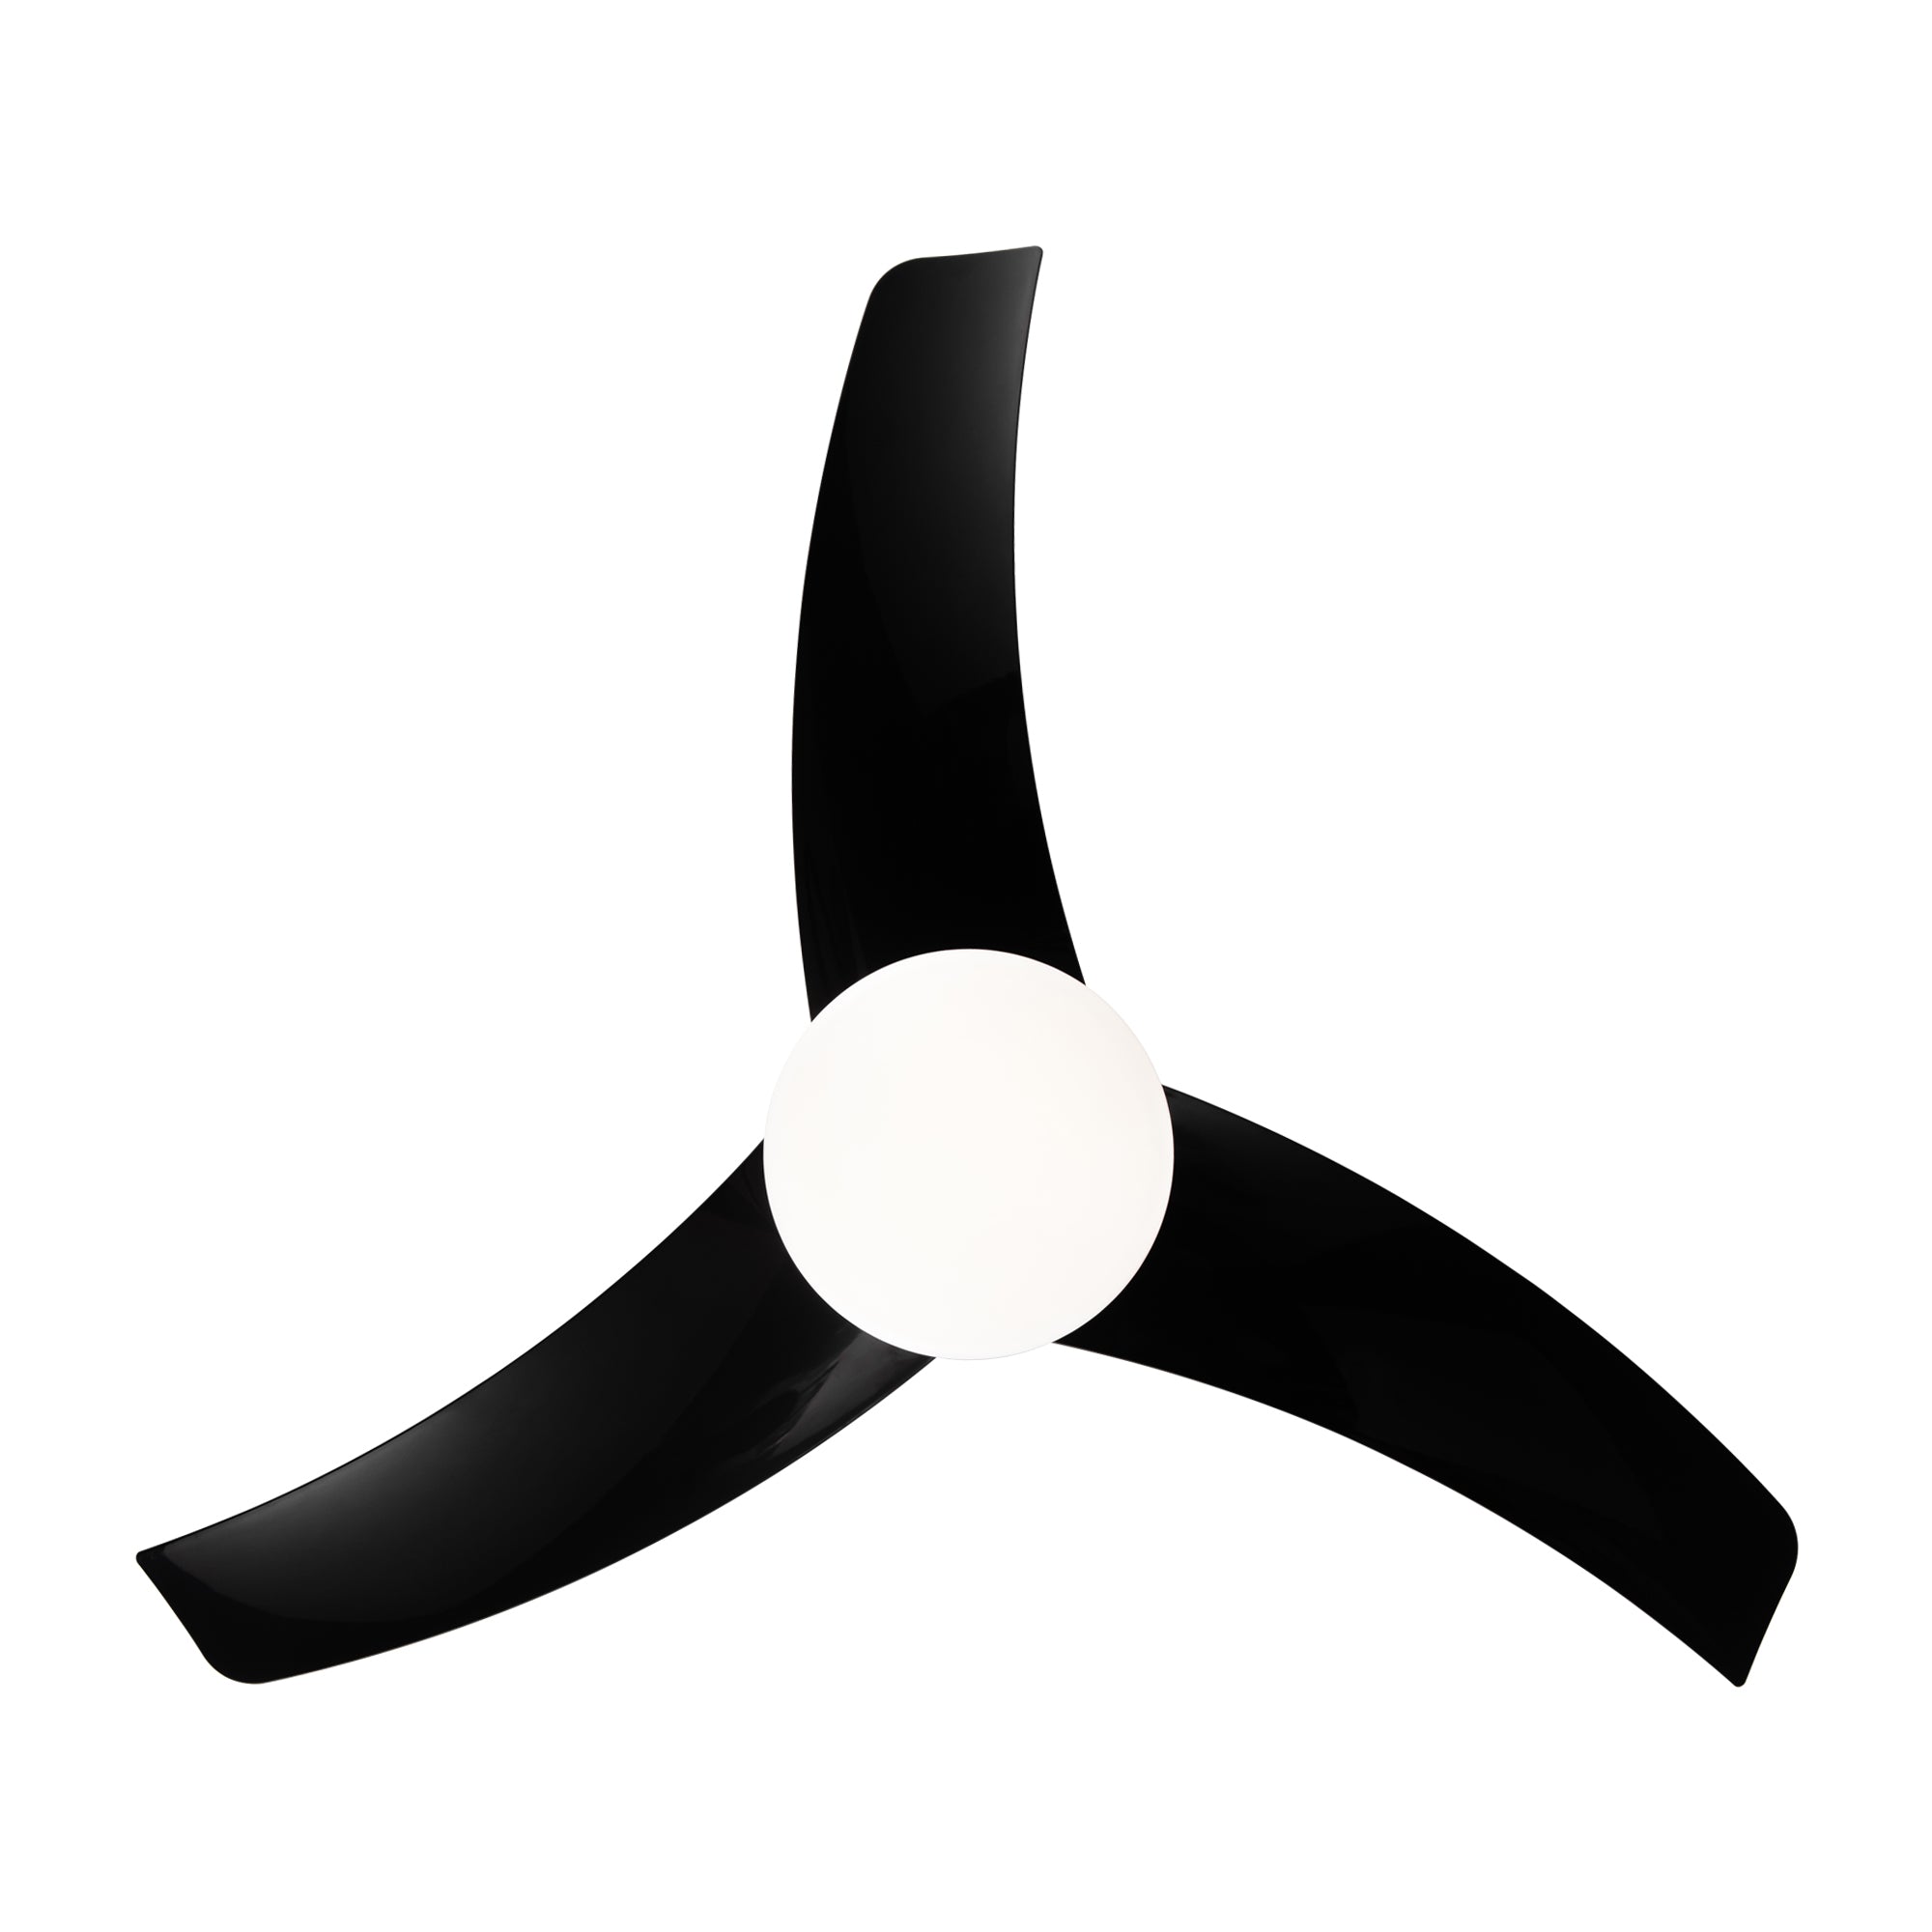 Matte Black Ceiling Fan with Integrated LED Light black-abs